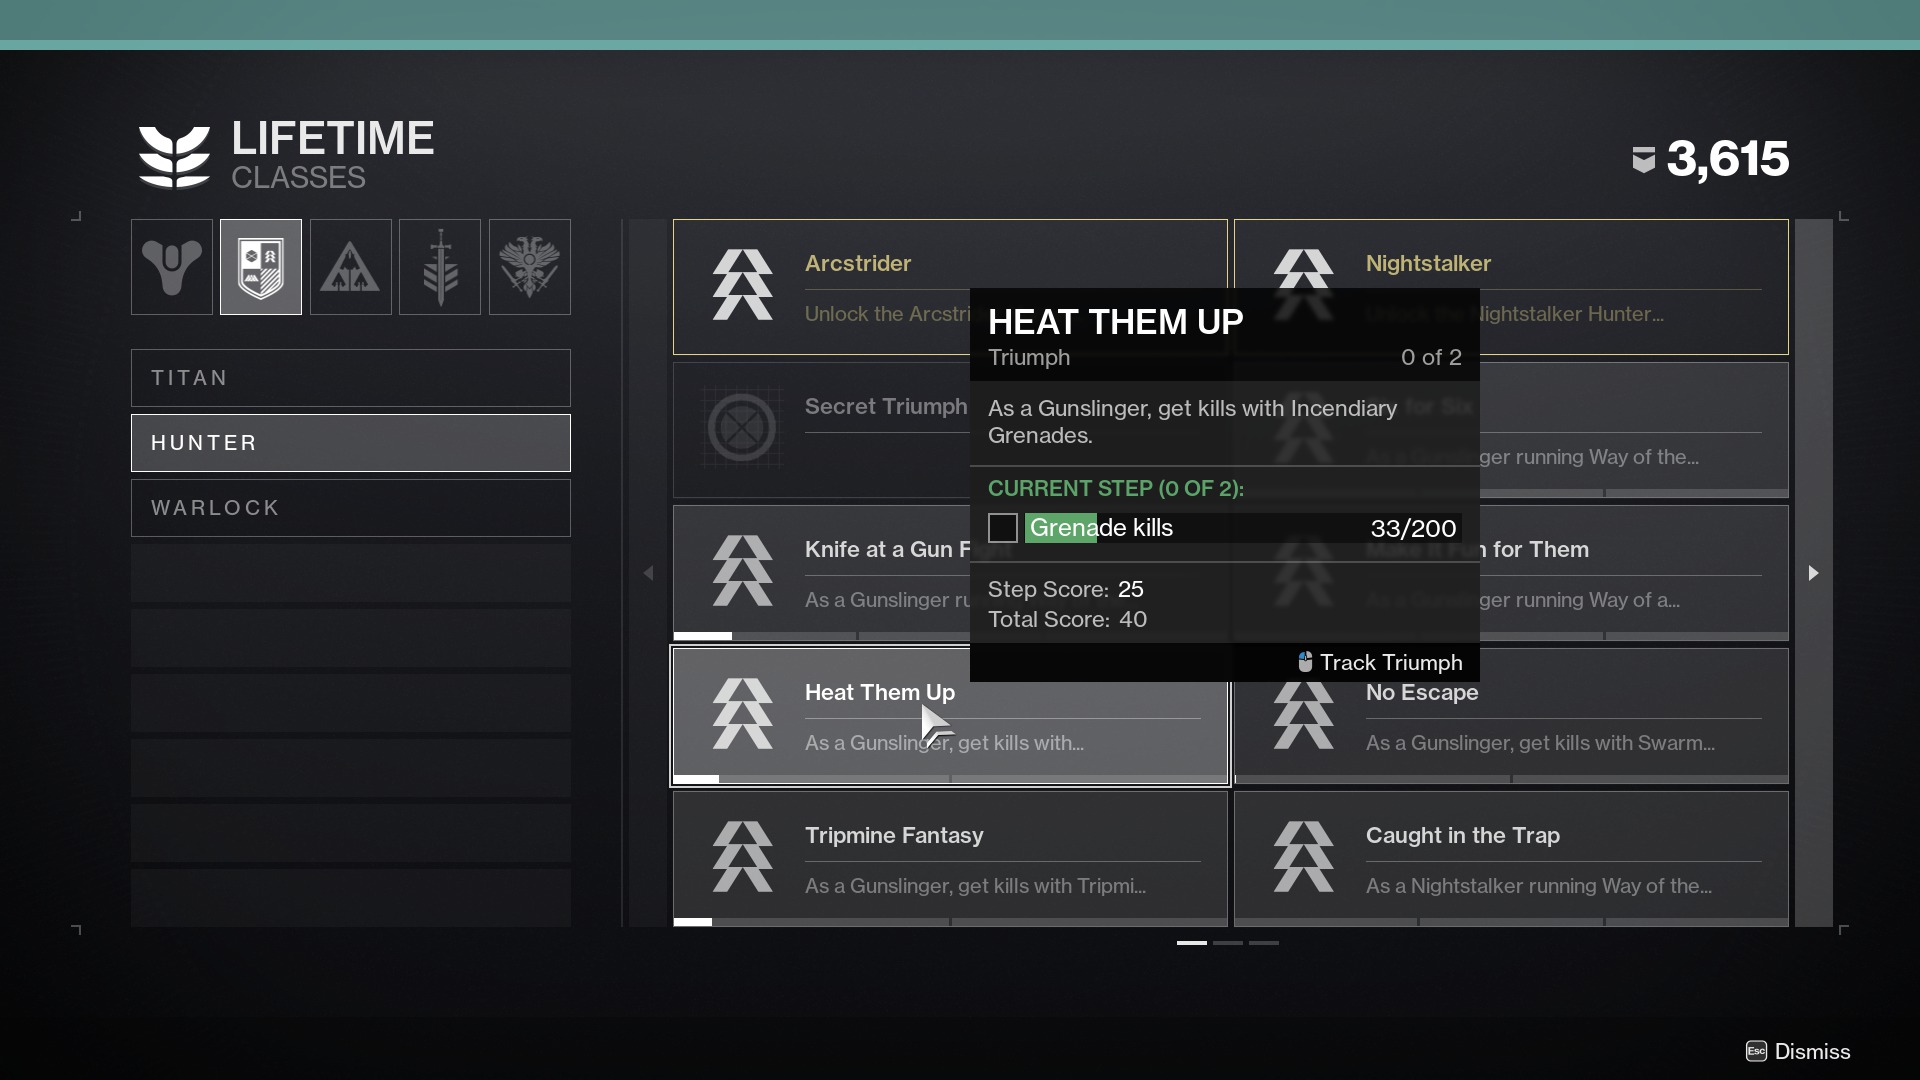 An example of a presentation node of a presentation node—seen here are the nodes for player class triumphs. Presentation nodes can have children such as presentation nodes, triumph records, collectibles, and more.